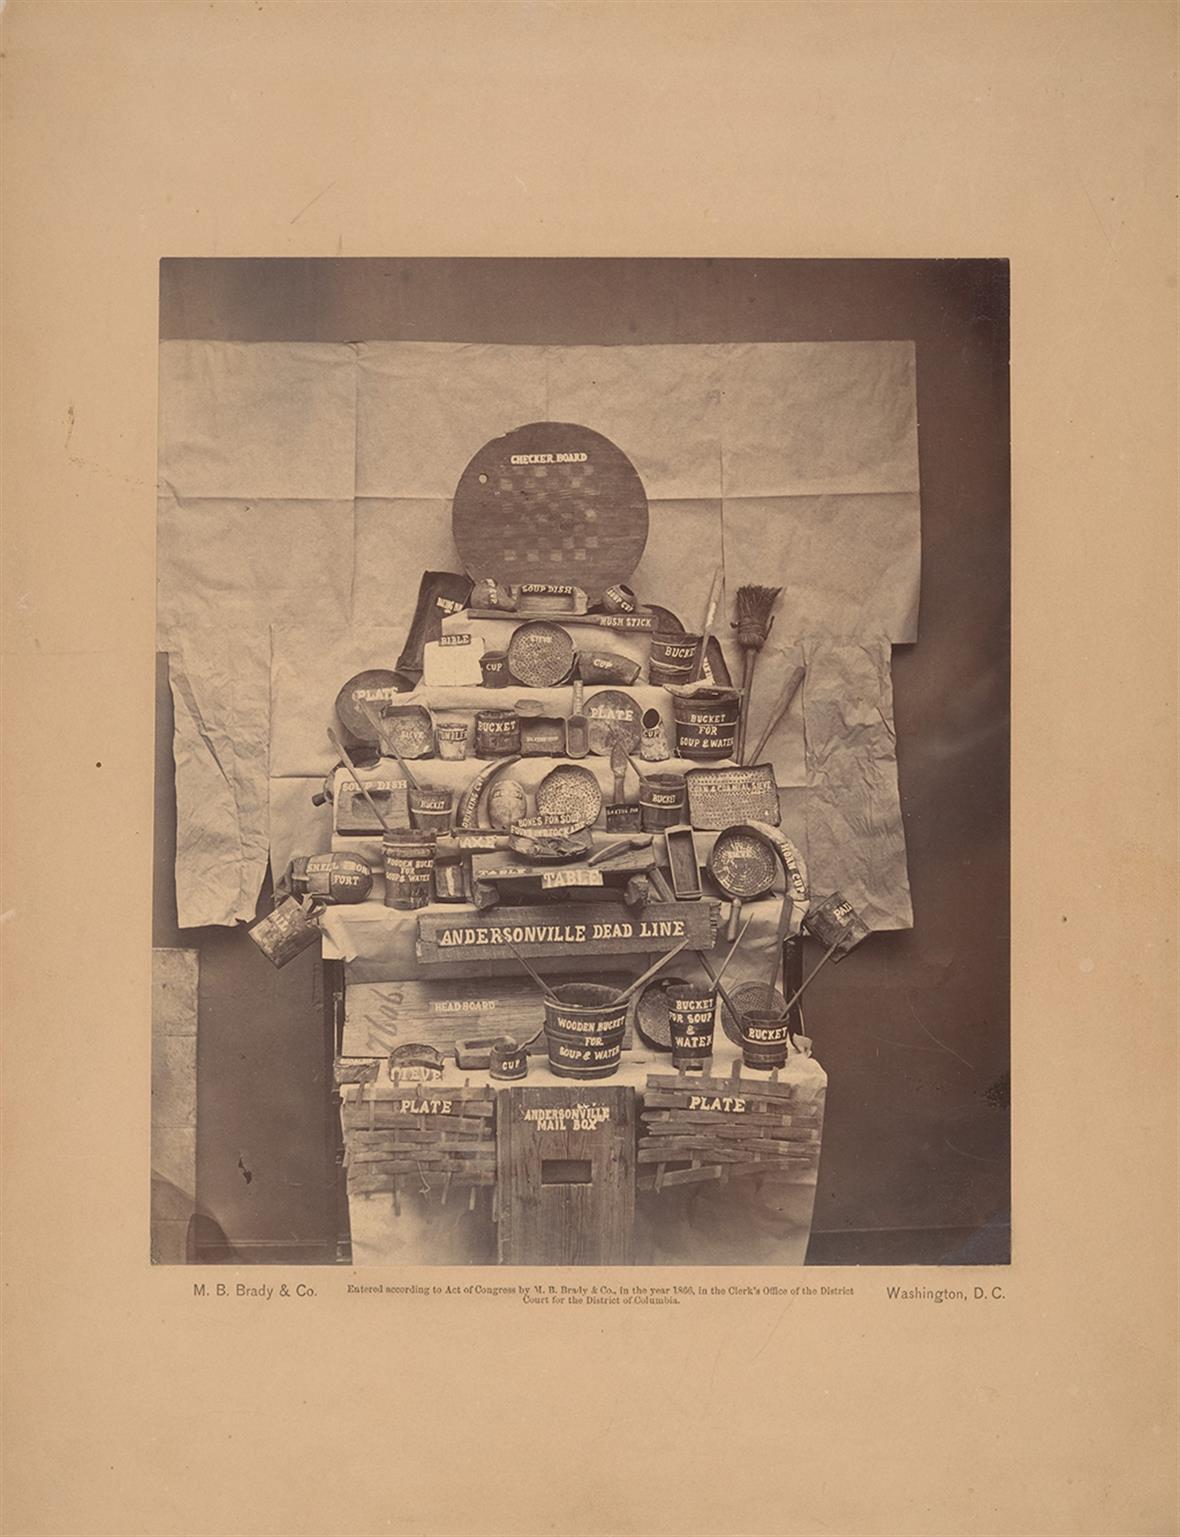 The photograph, Relics of Andersonville Prison